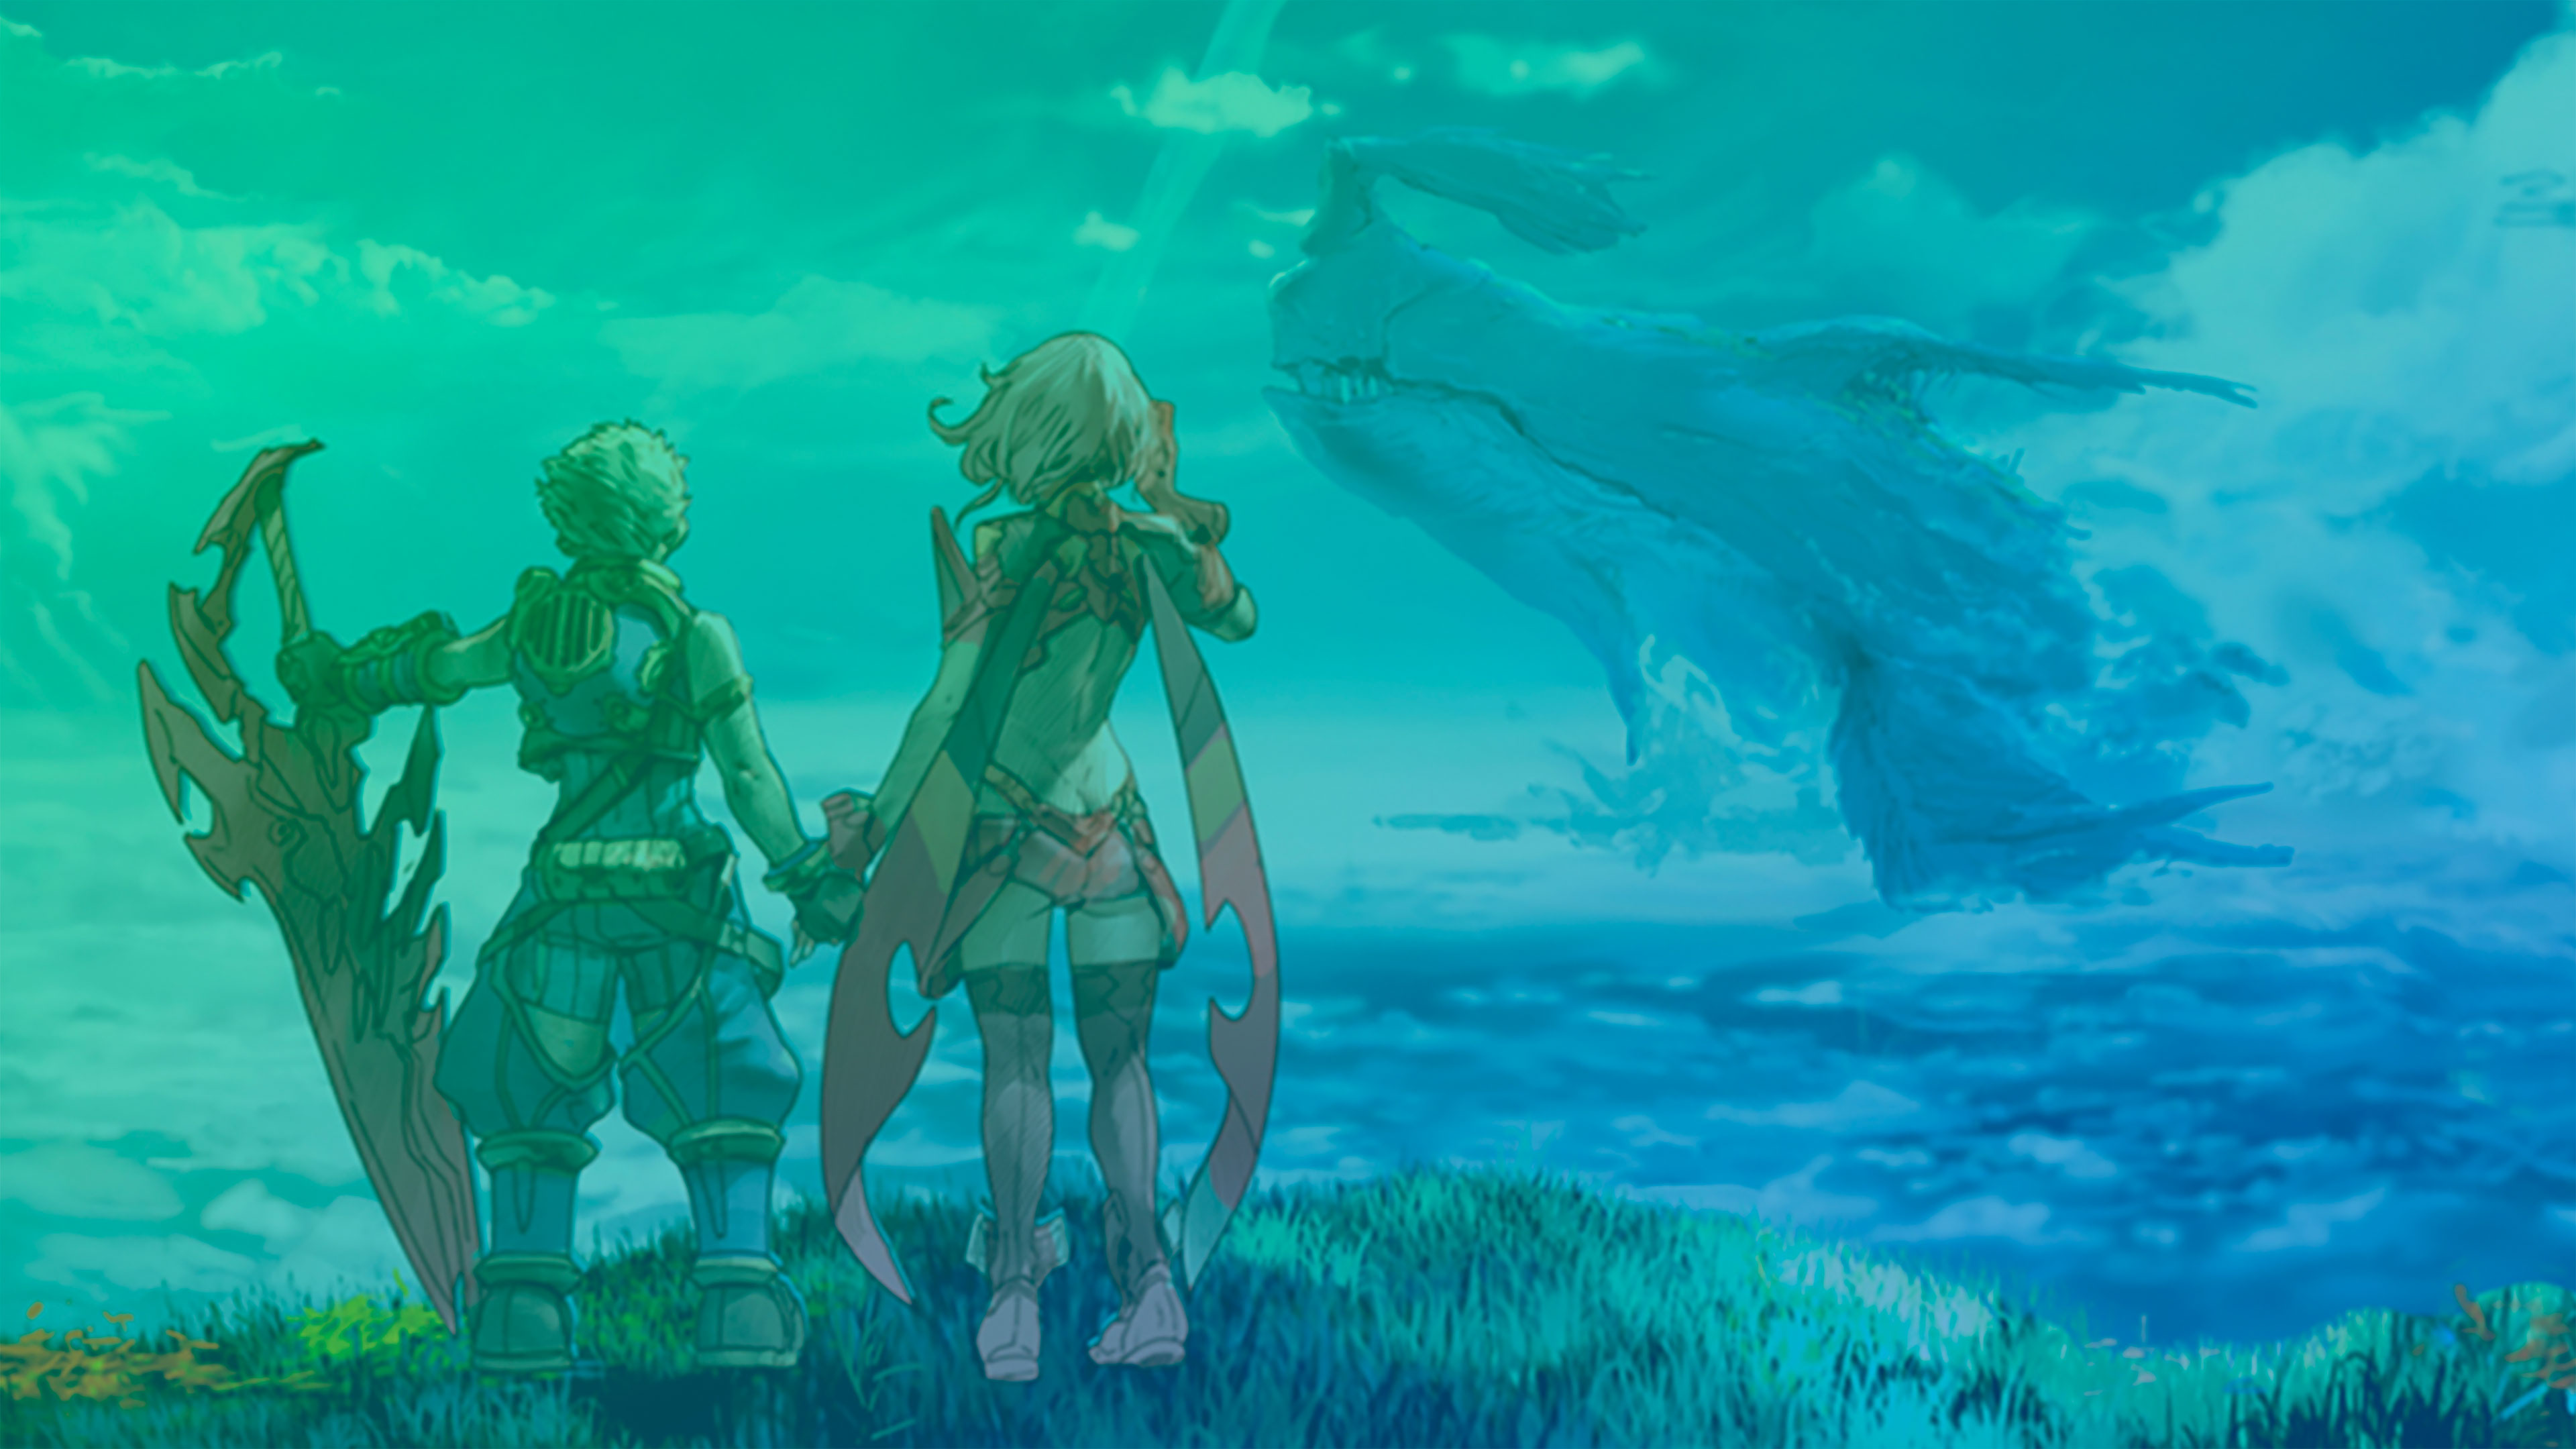 Xenoblade Chronicles 2 Wallpapers In Ultra Hd 4k Gameranx